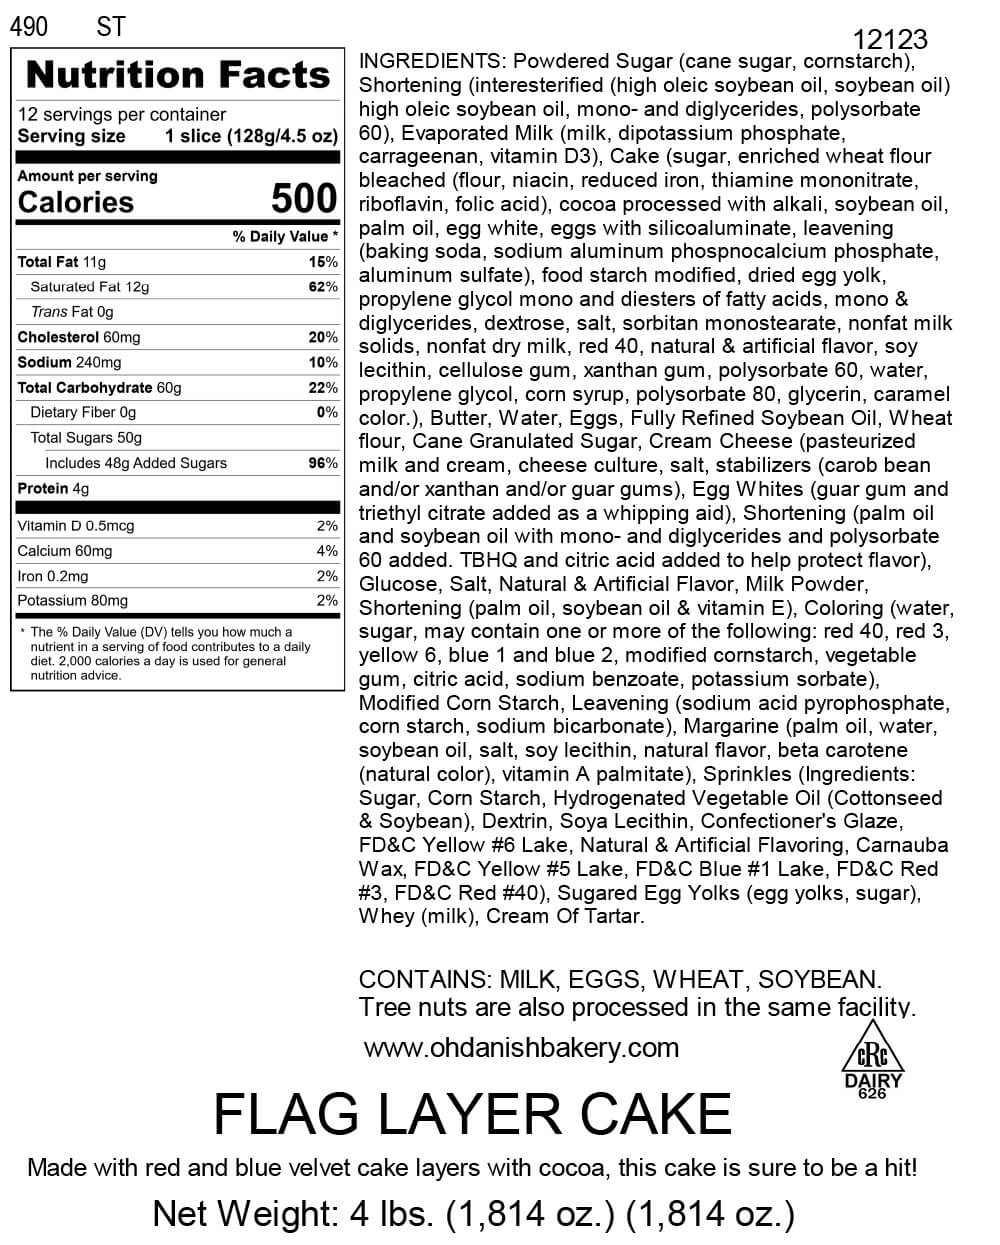 Nutritional Label for Flag Layer Cake